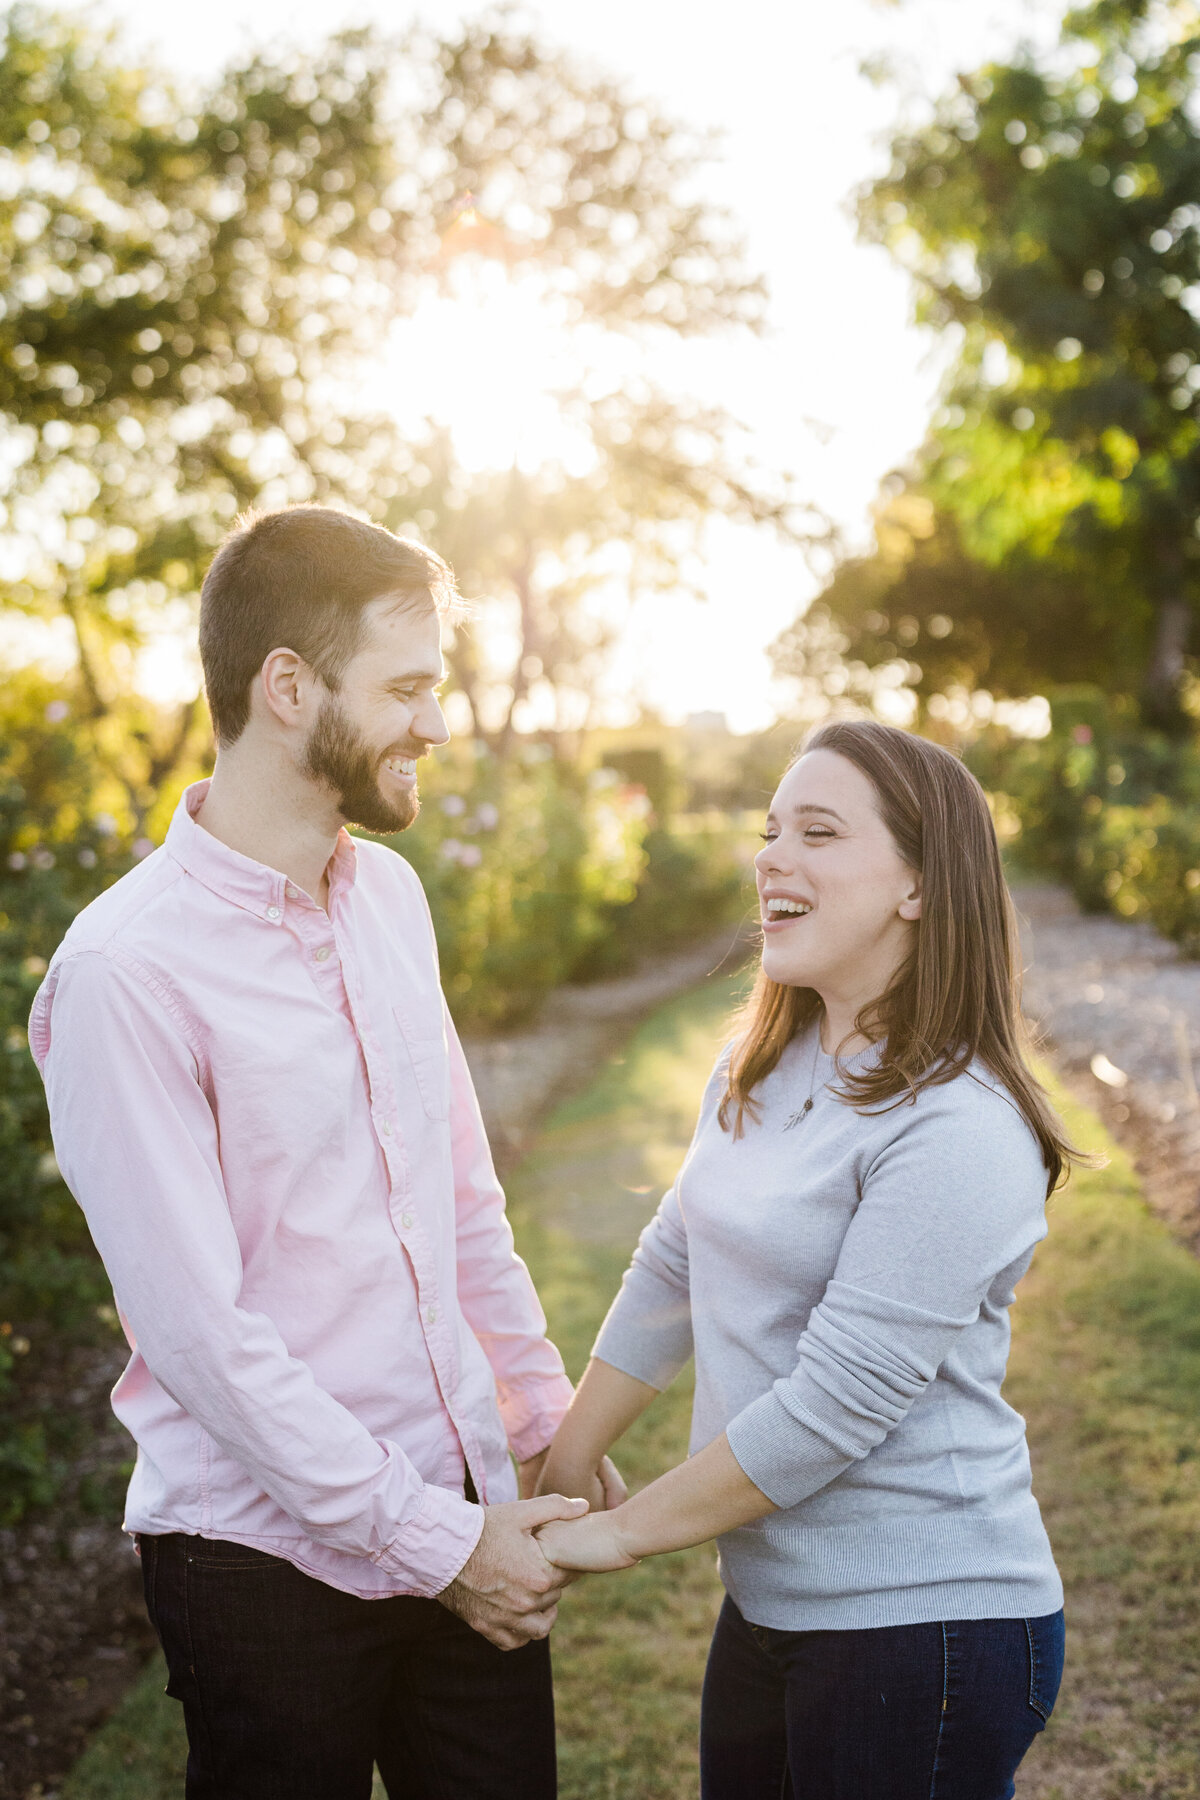 A couple holding hands, smiling, and looking at each other during their engagement session at The Rose Gardens of Farmers Branch in Farmers Branch, Texas. The woman on the right is wearing a grey top and jeans while the man on the left is wearing a salmon dress shirt and jeans. They are backed by many plants and trees.